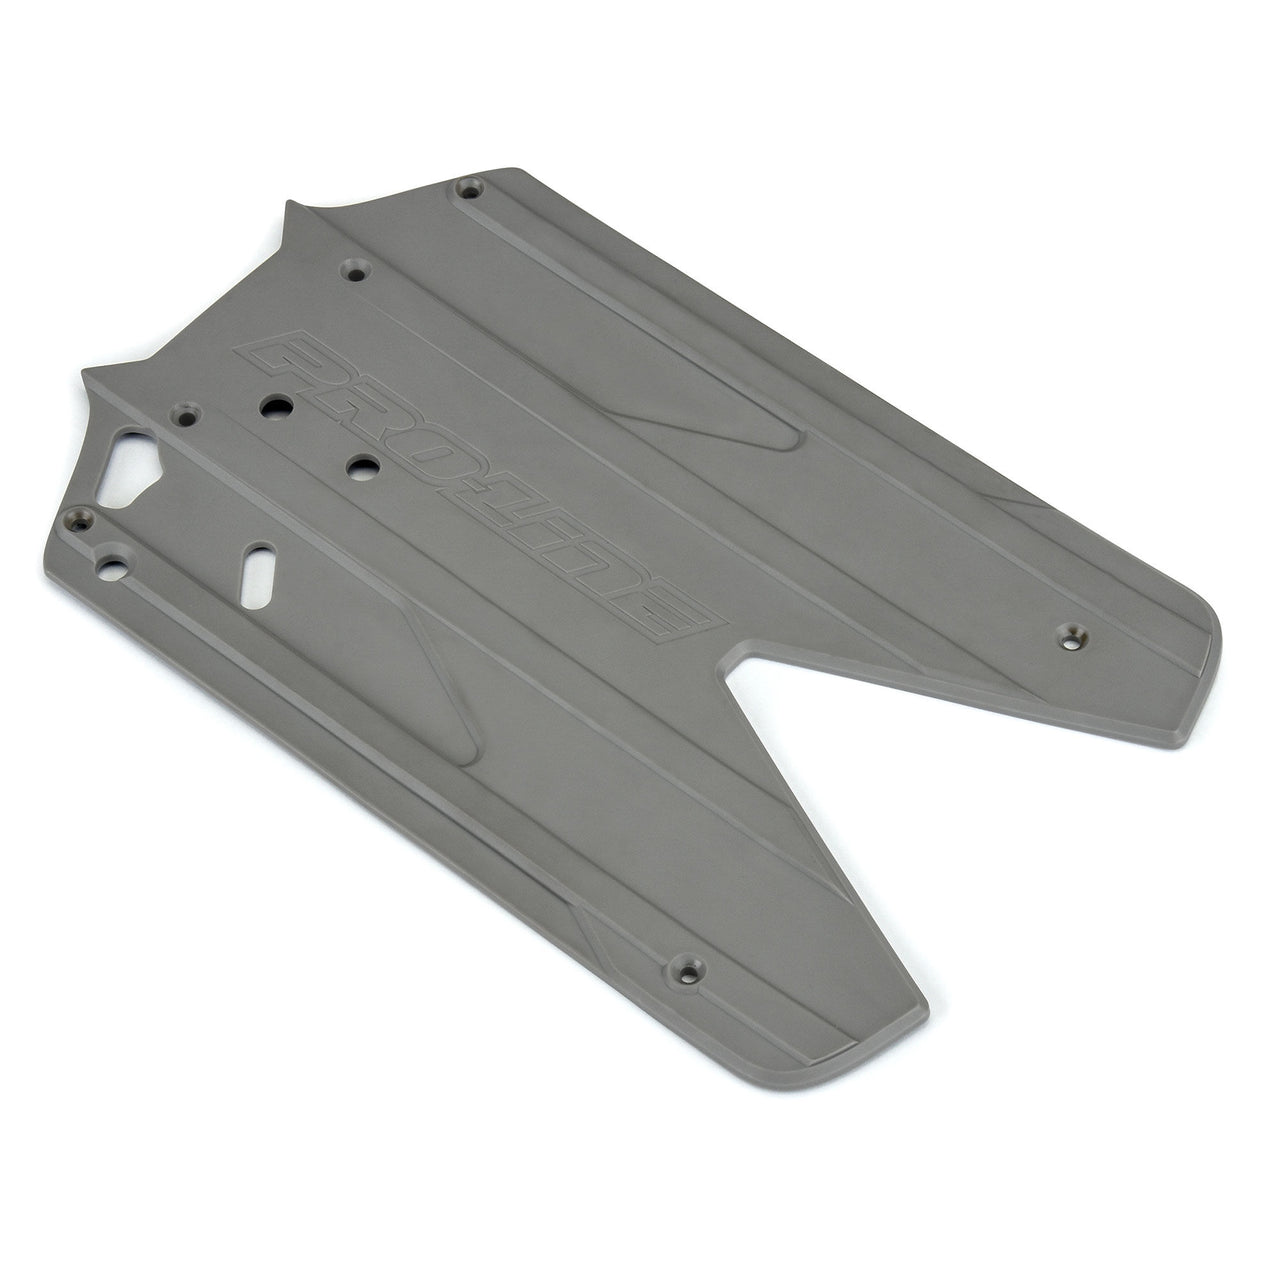 PRO639605 Bash Armor Chassis Protector (Stone Gray) for ARRMA 3S Short WB